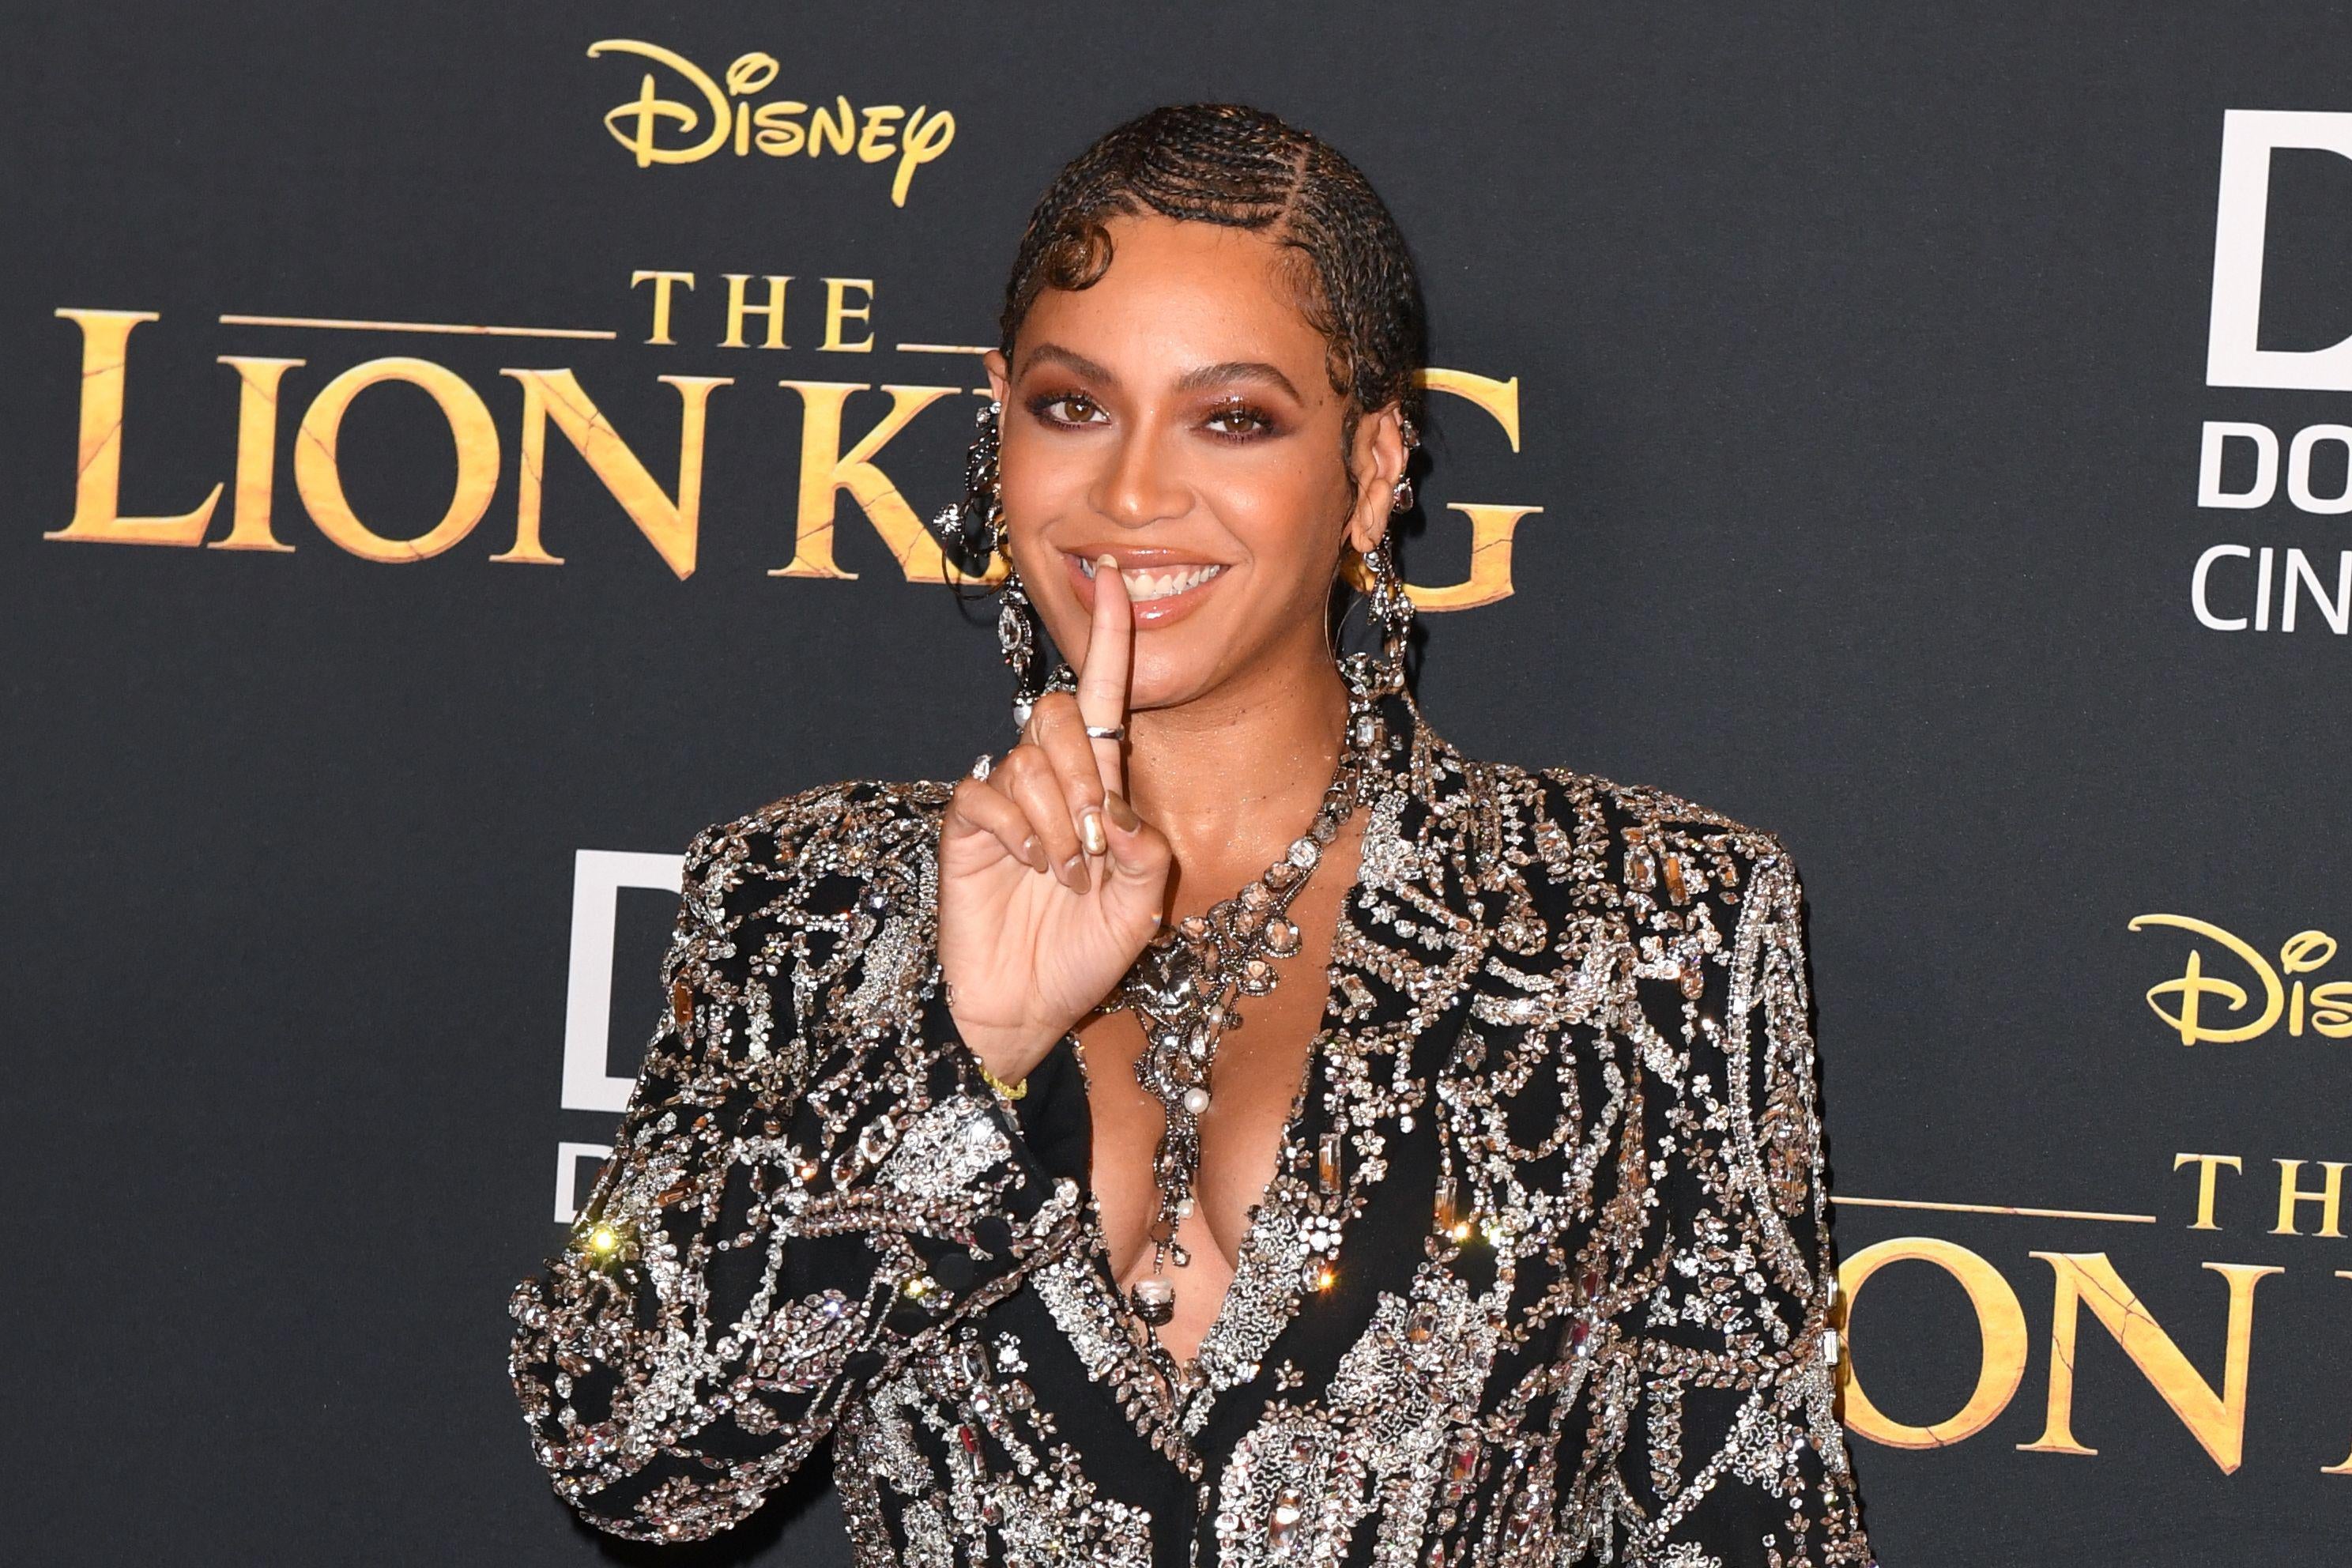 Beyonce at the premiere Disney Lion King remake this week in Hollywood.